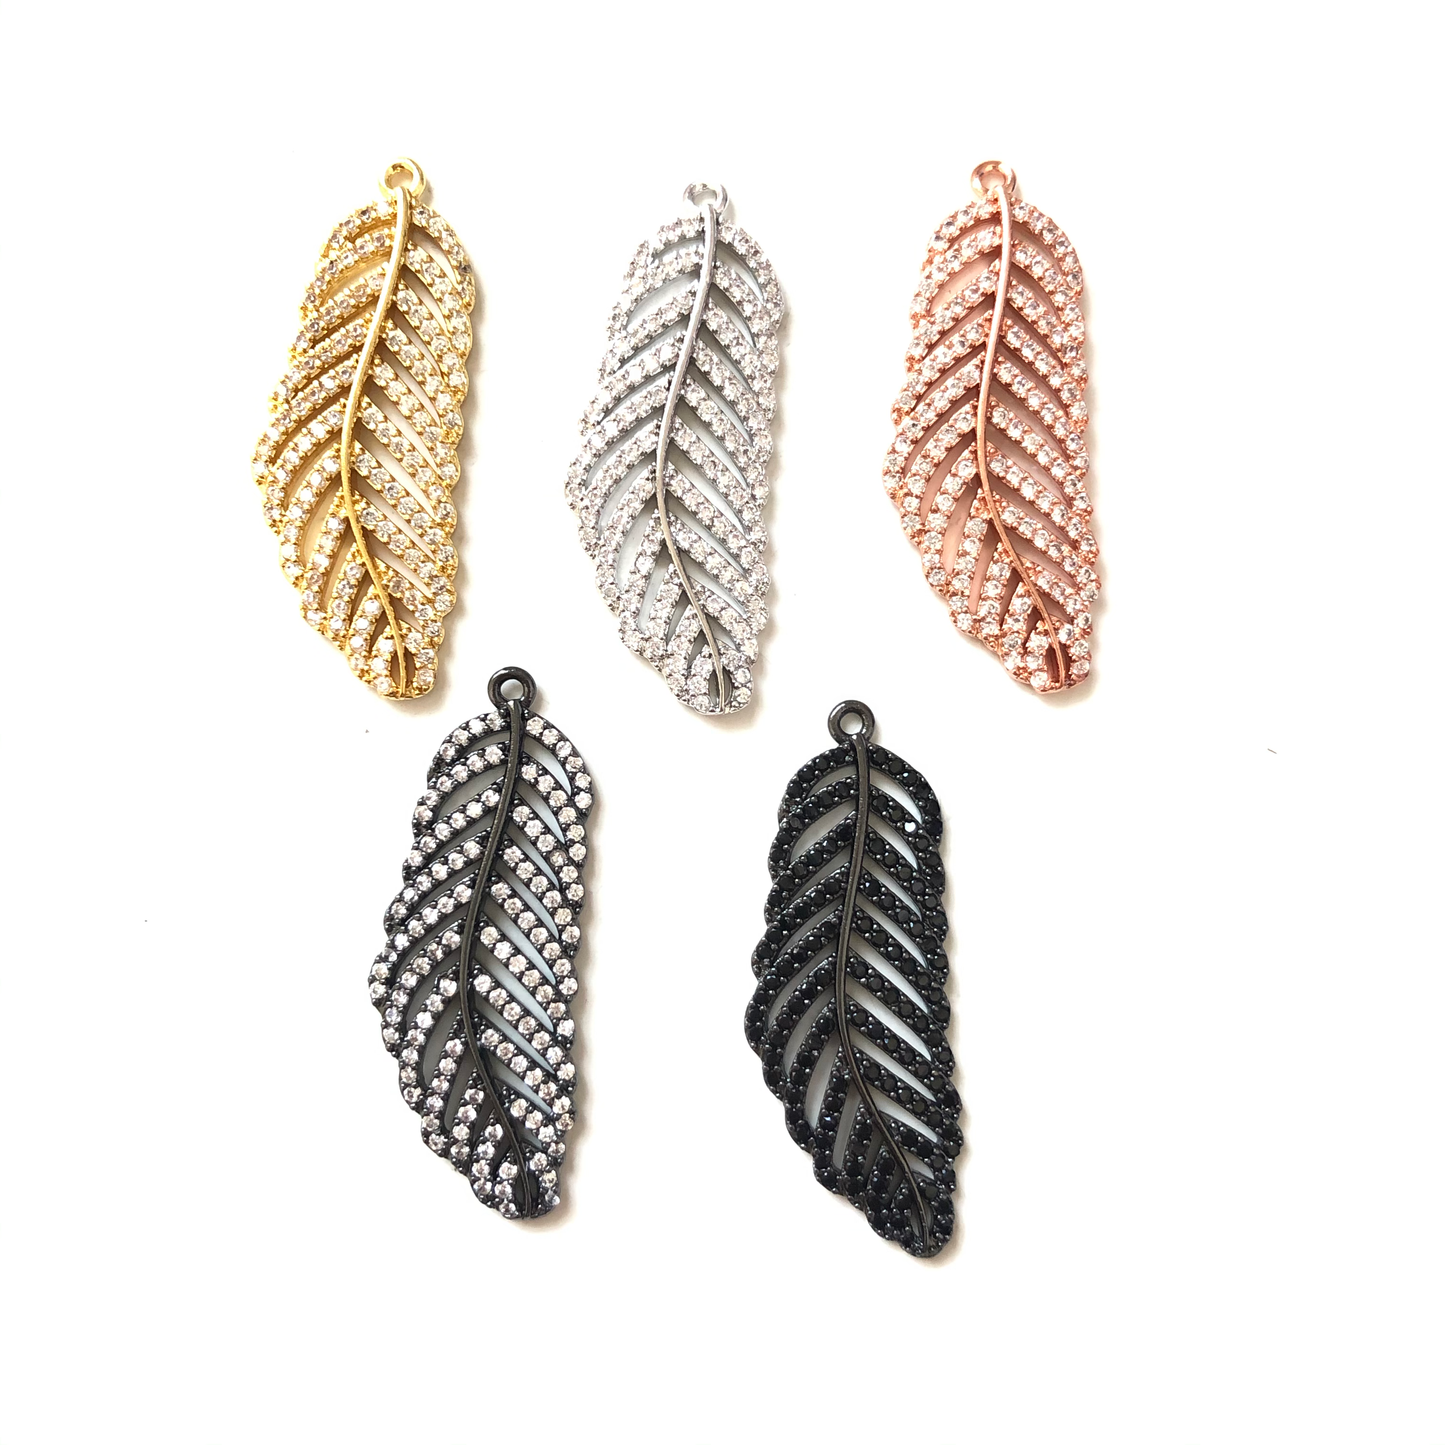 10pcs/lot 30.5*13mm CZ Paved Feather Charms CZ Paved Charms Feathers On Sale Charms Beads Beyond